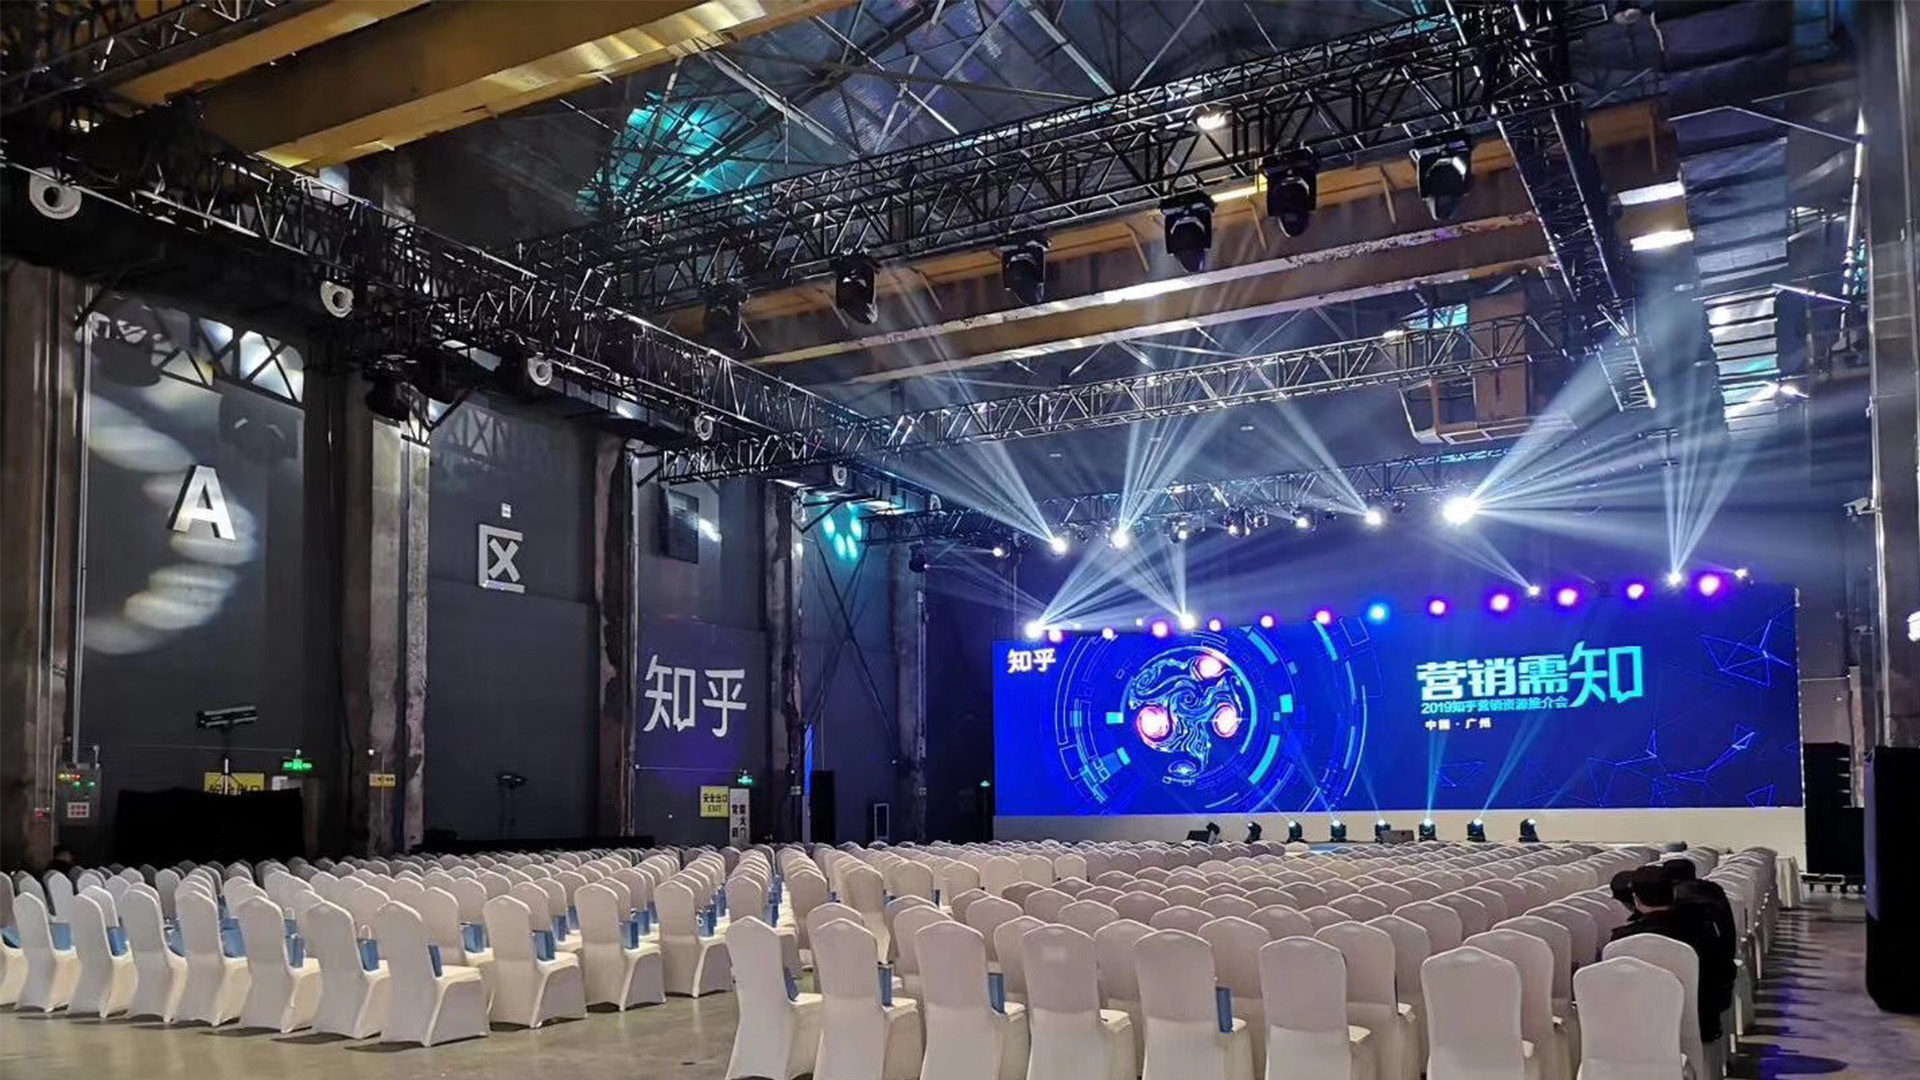 It is an Conference Event and Launching Event for Zhihu by D2 Studio Event Planner Event Agency Event Planner Hong Kong and Guangzhou China who does Event Planning for Conference Event and Launching Event 1